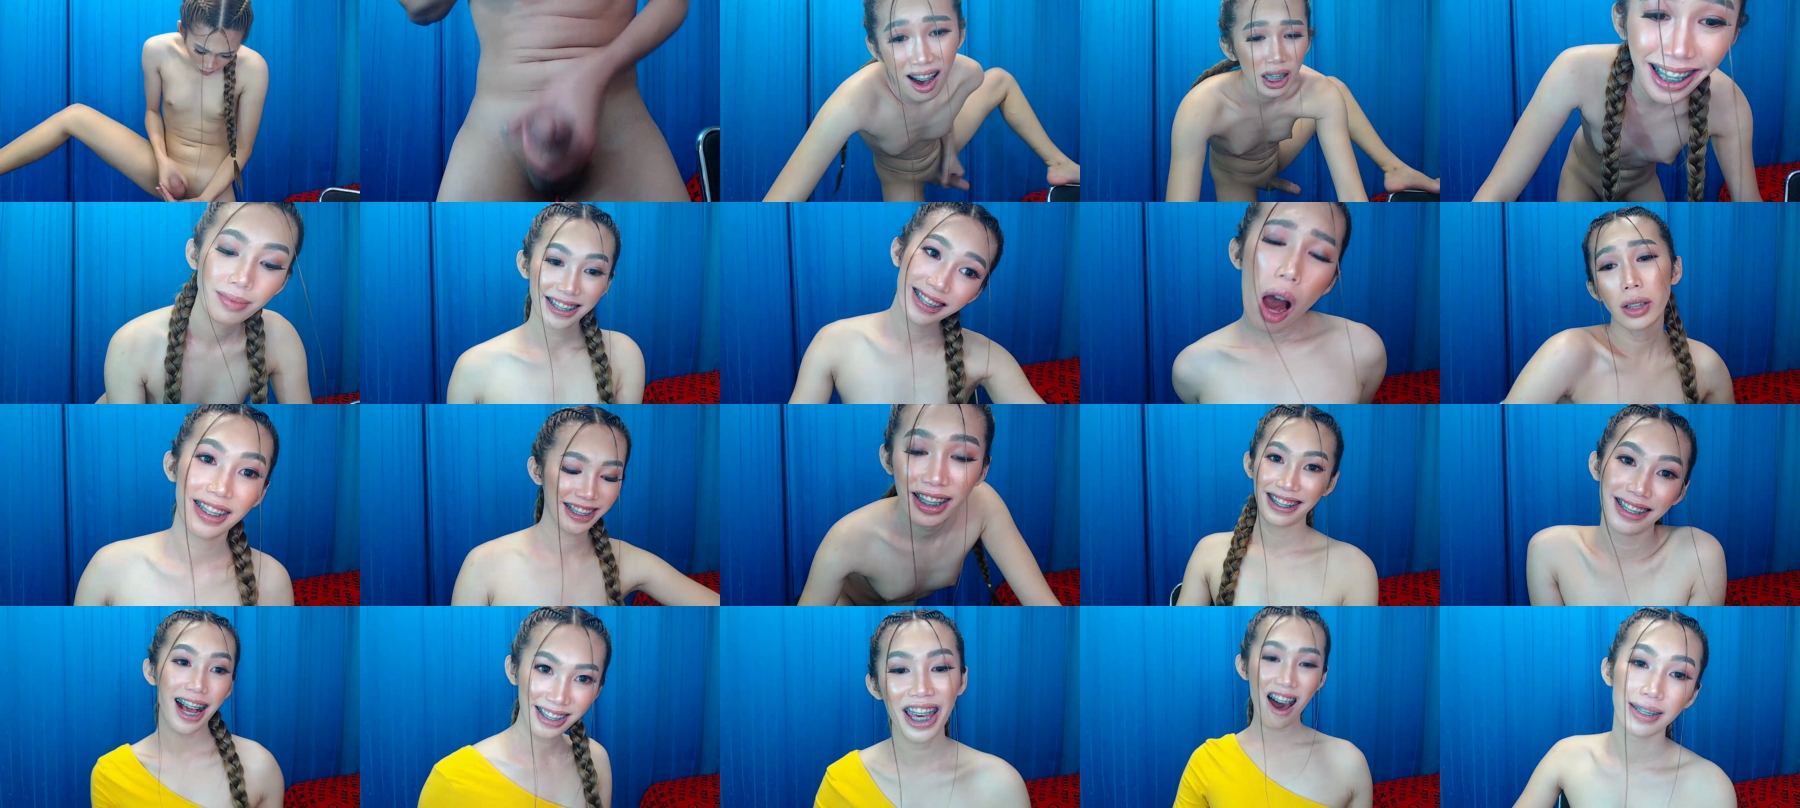 Asianqt19  15-10-2021 Trans Topless